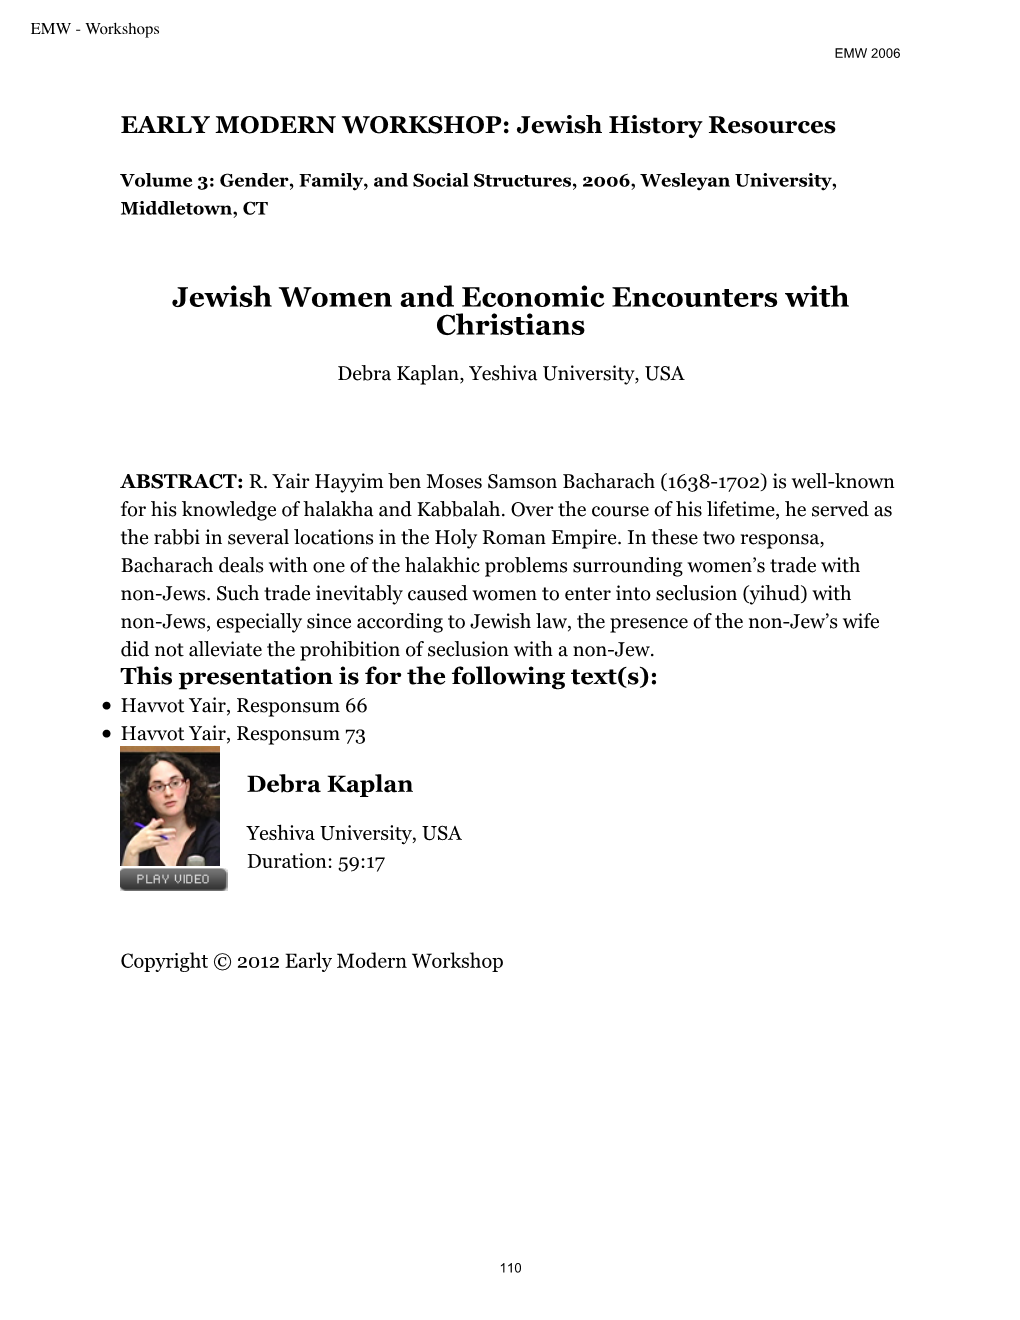 Jewish Women and Economic Encounters with Christians